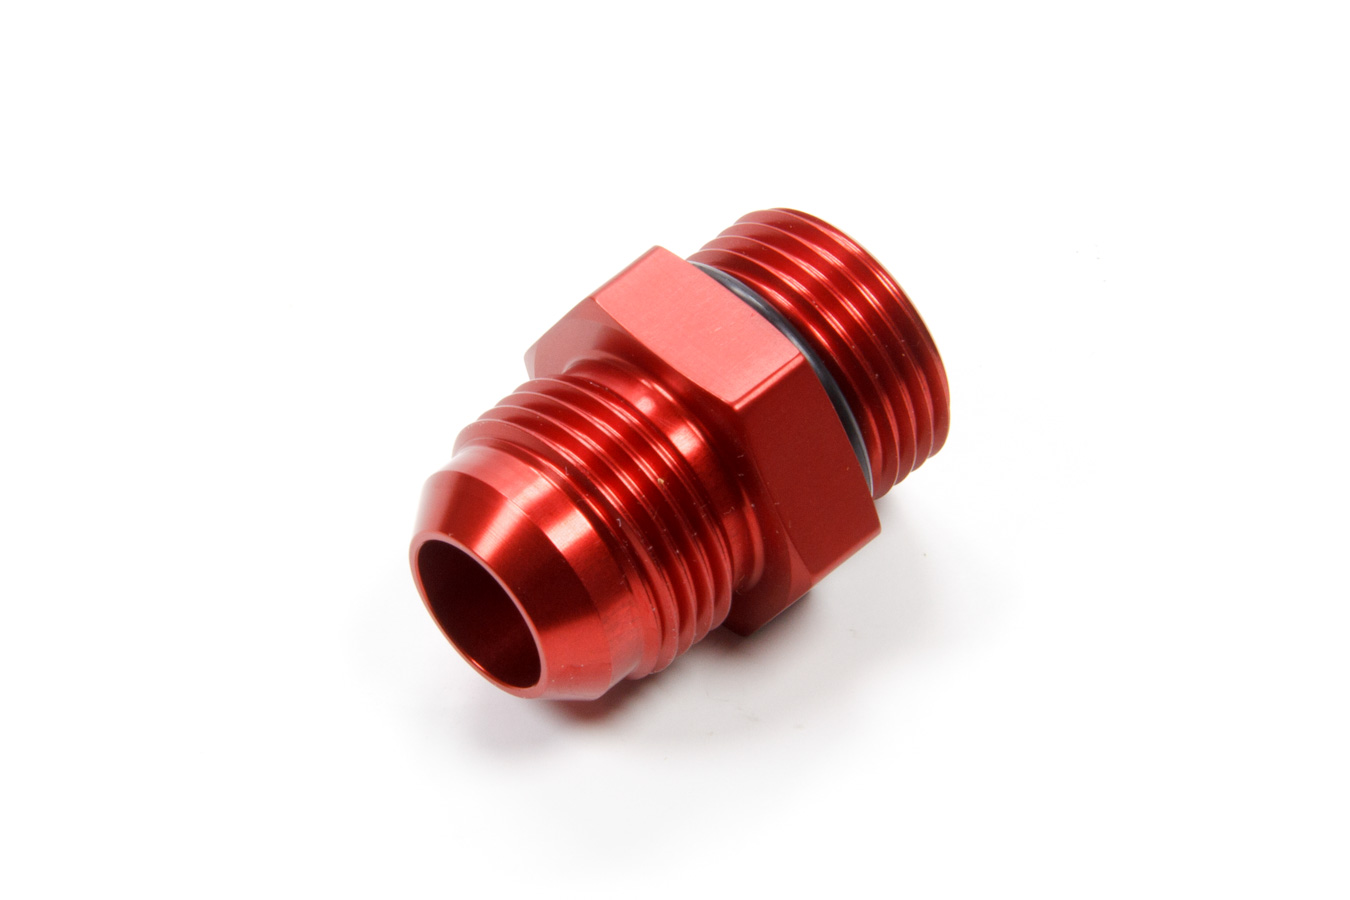 STOCK CAR PROD-OIL PUMPS Red 12 AN to 12 An Straight Adapter Fitting P/N 1212-12